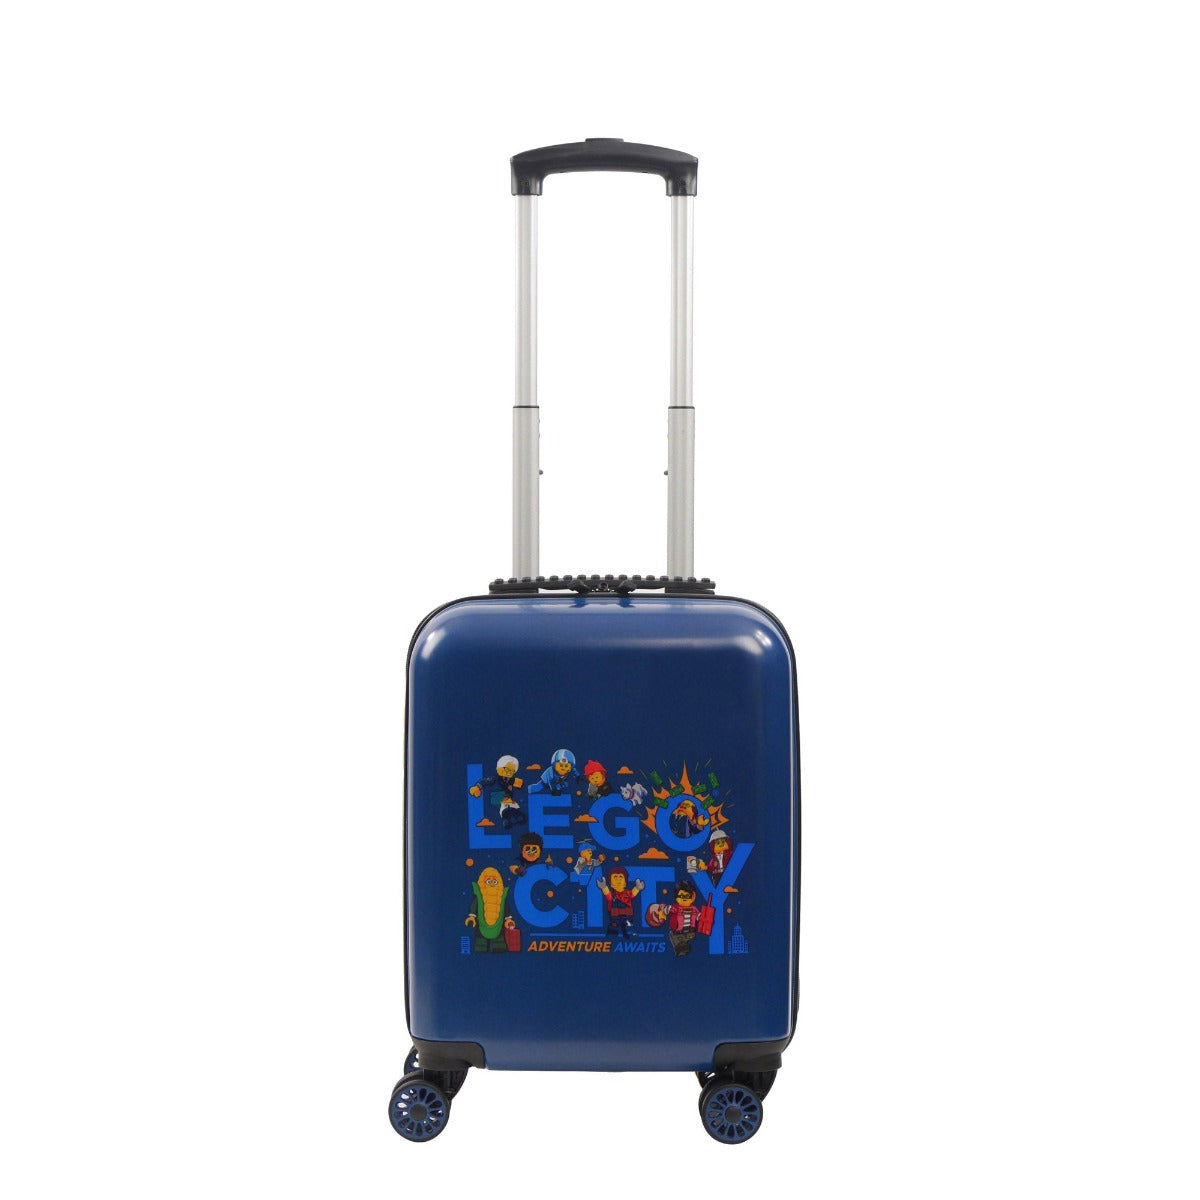 Blue Playdate Lego City Awaits 18-inch carry-on spinner suitcase for kids